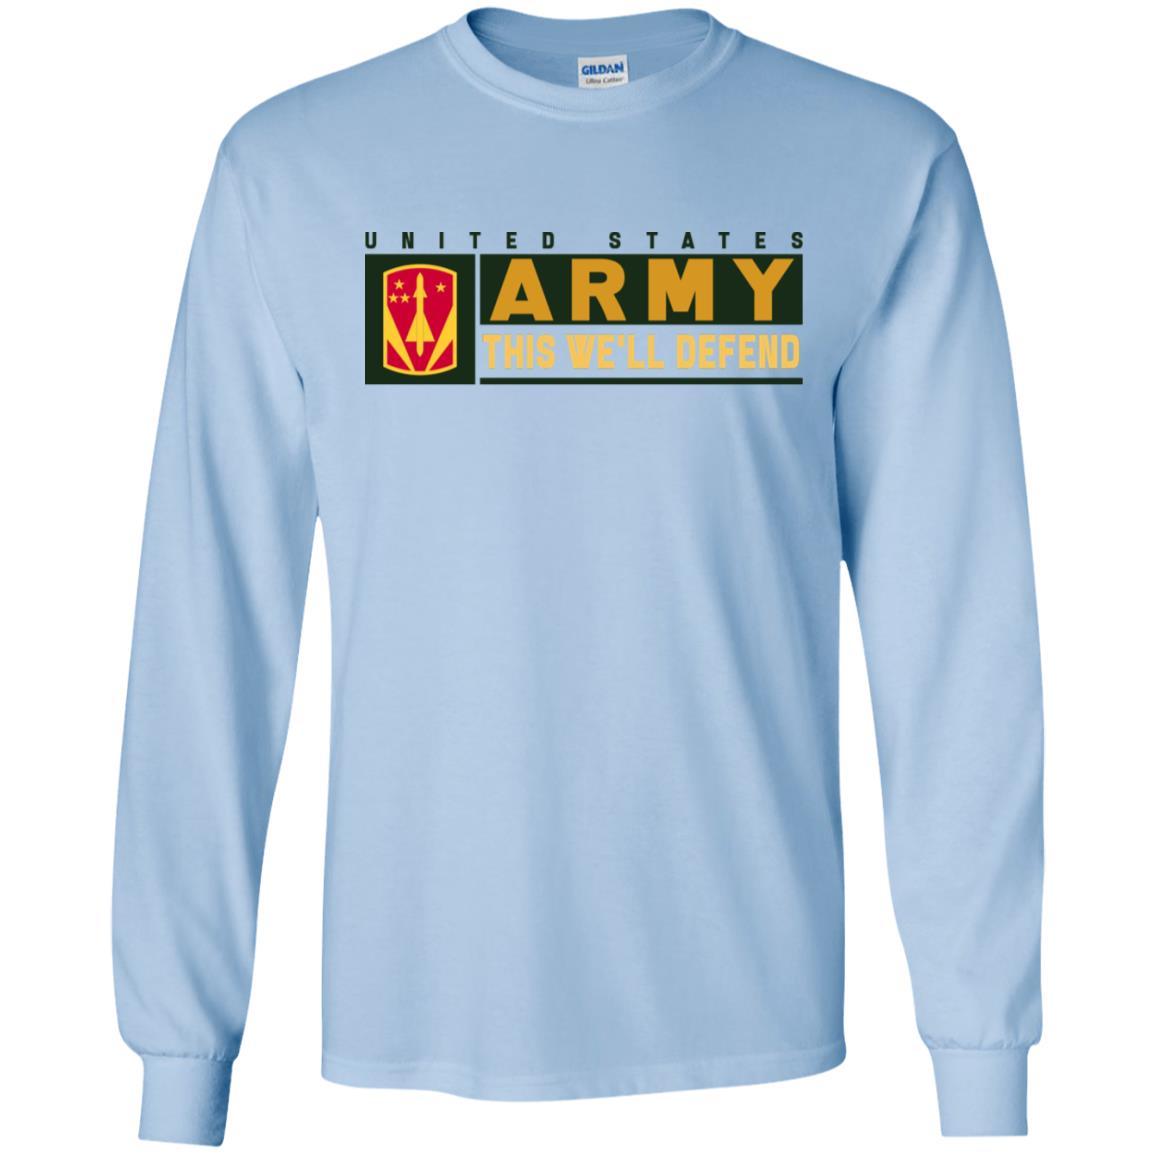 US Army 31ST AIR DEFENSE ARTILLERY BRIGADE- This We'll Defend T-Shirt On Front For Men-TShirt-Army-Veterans Nation